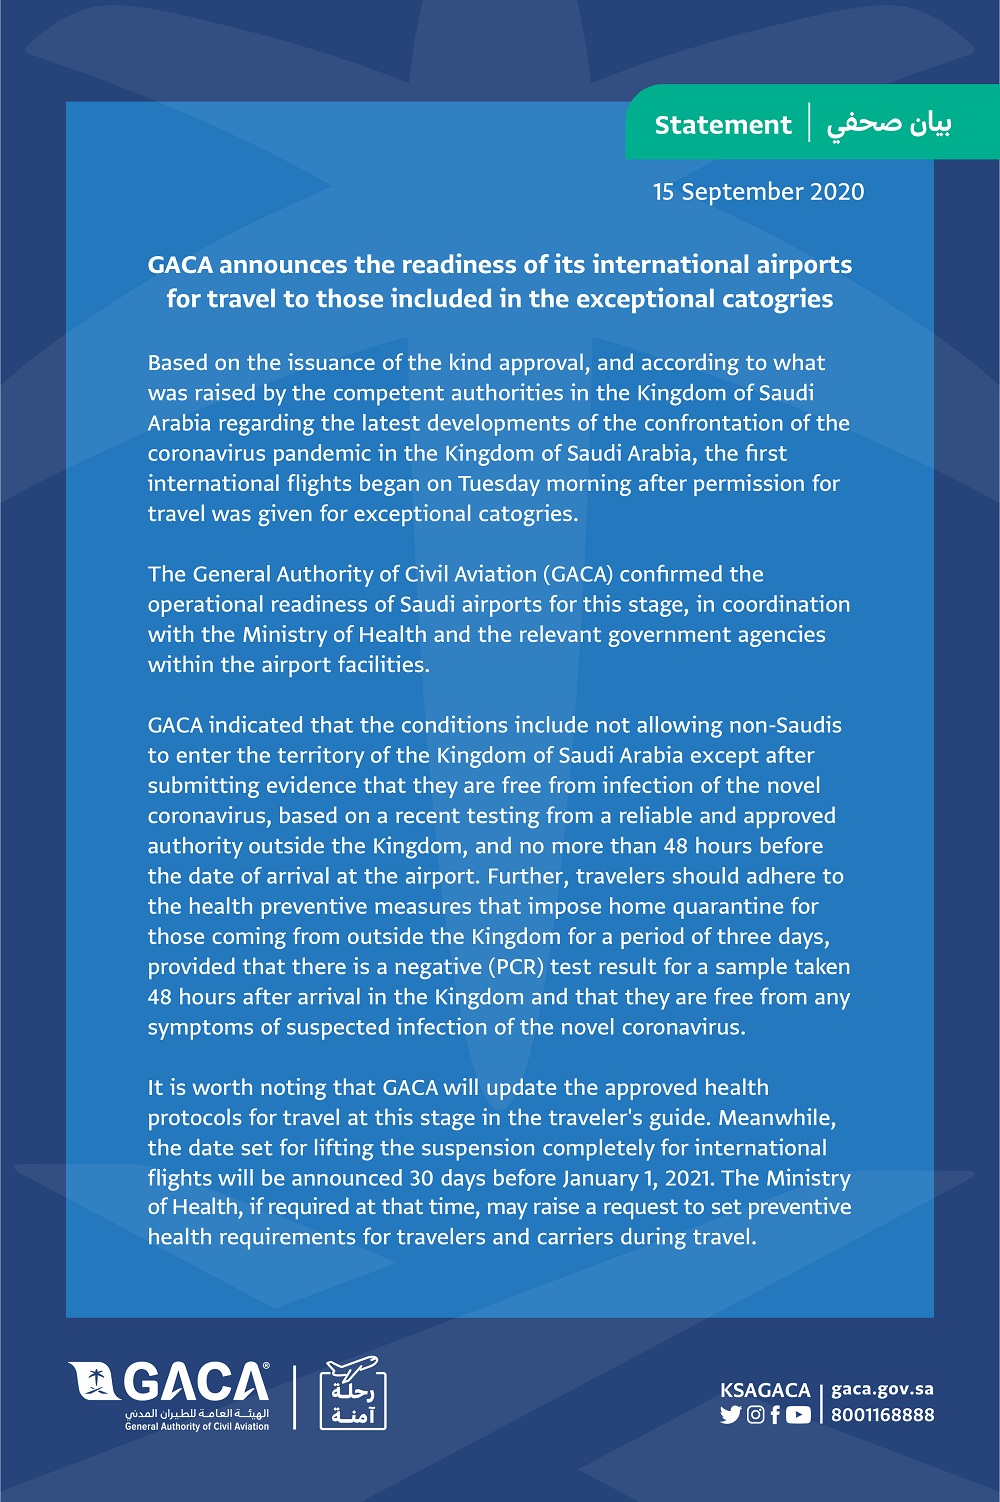 GACA announces the readiness of its international airports for travel to those included in the exceptional Categories